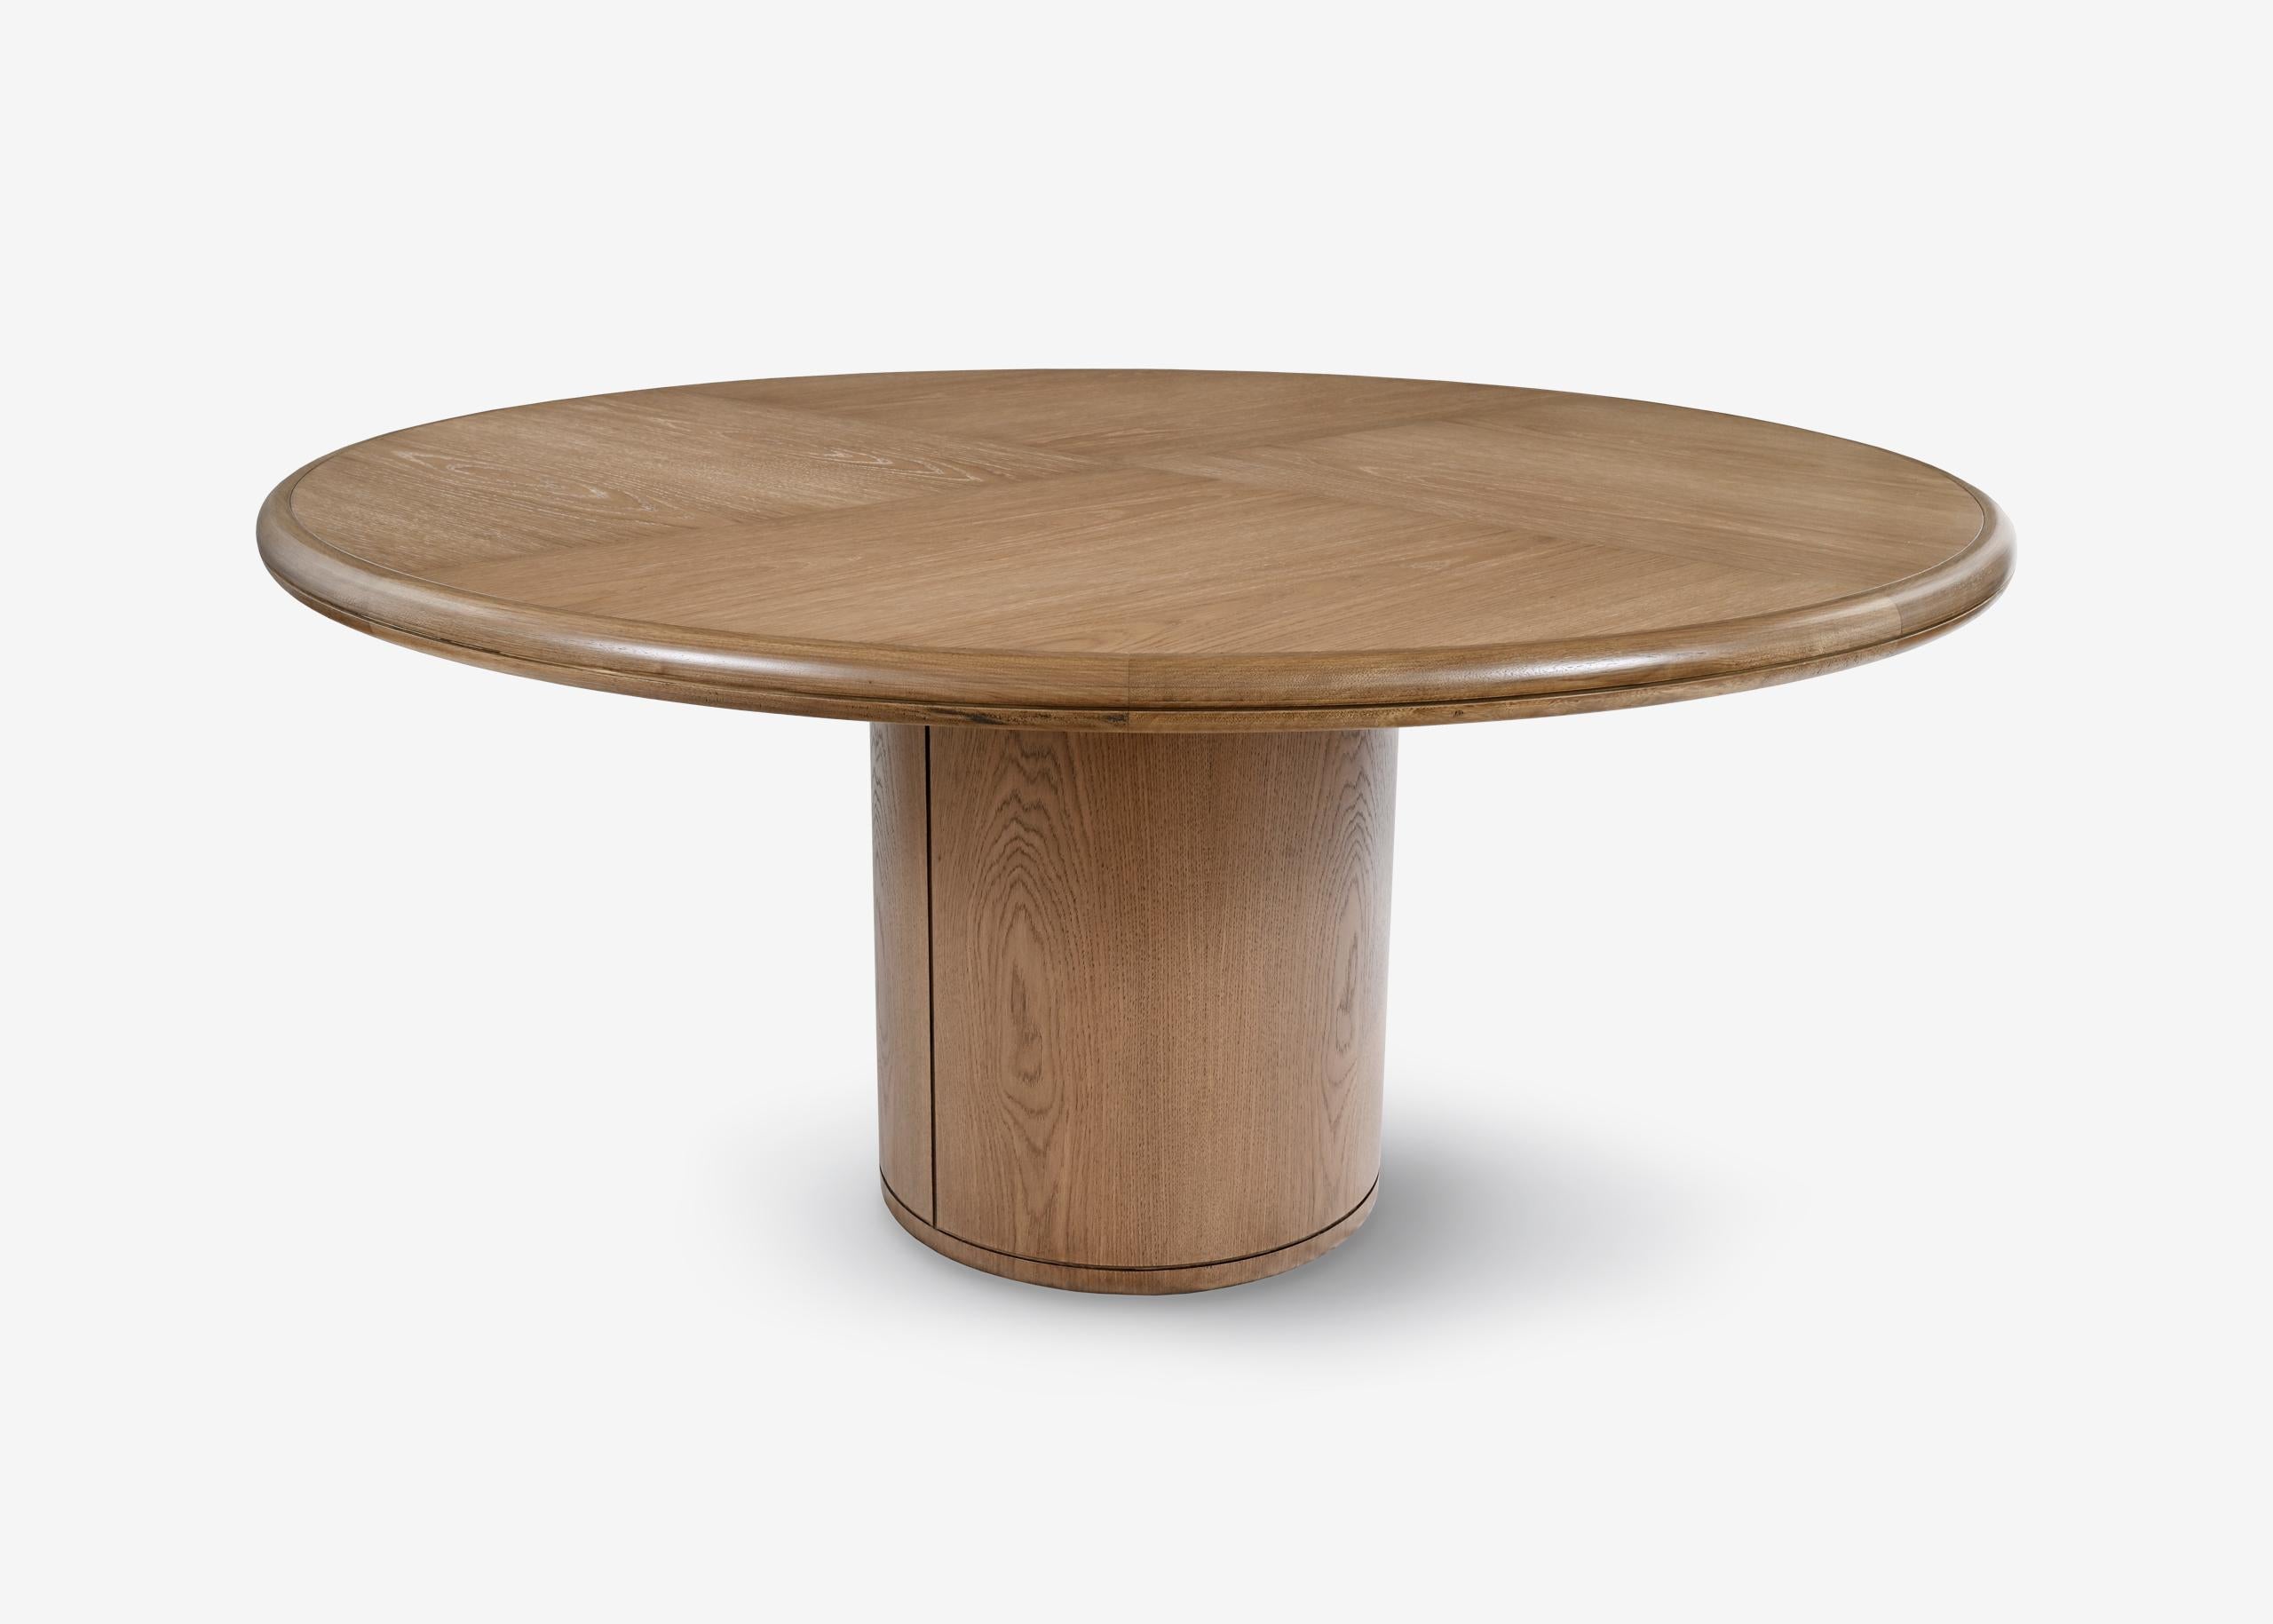 Moon oak round table signed by Buket Hoscan Bazman
Dimensions: Ø 160 x 75 CM
Material: Sandblasted oak 

Buket Hoscan Bazman was born in Izmir, Turkey, in 1989. Graduated at the Isik University and after few years of working in the industry, she